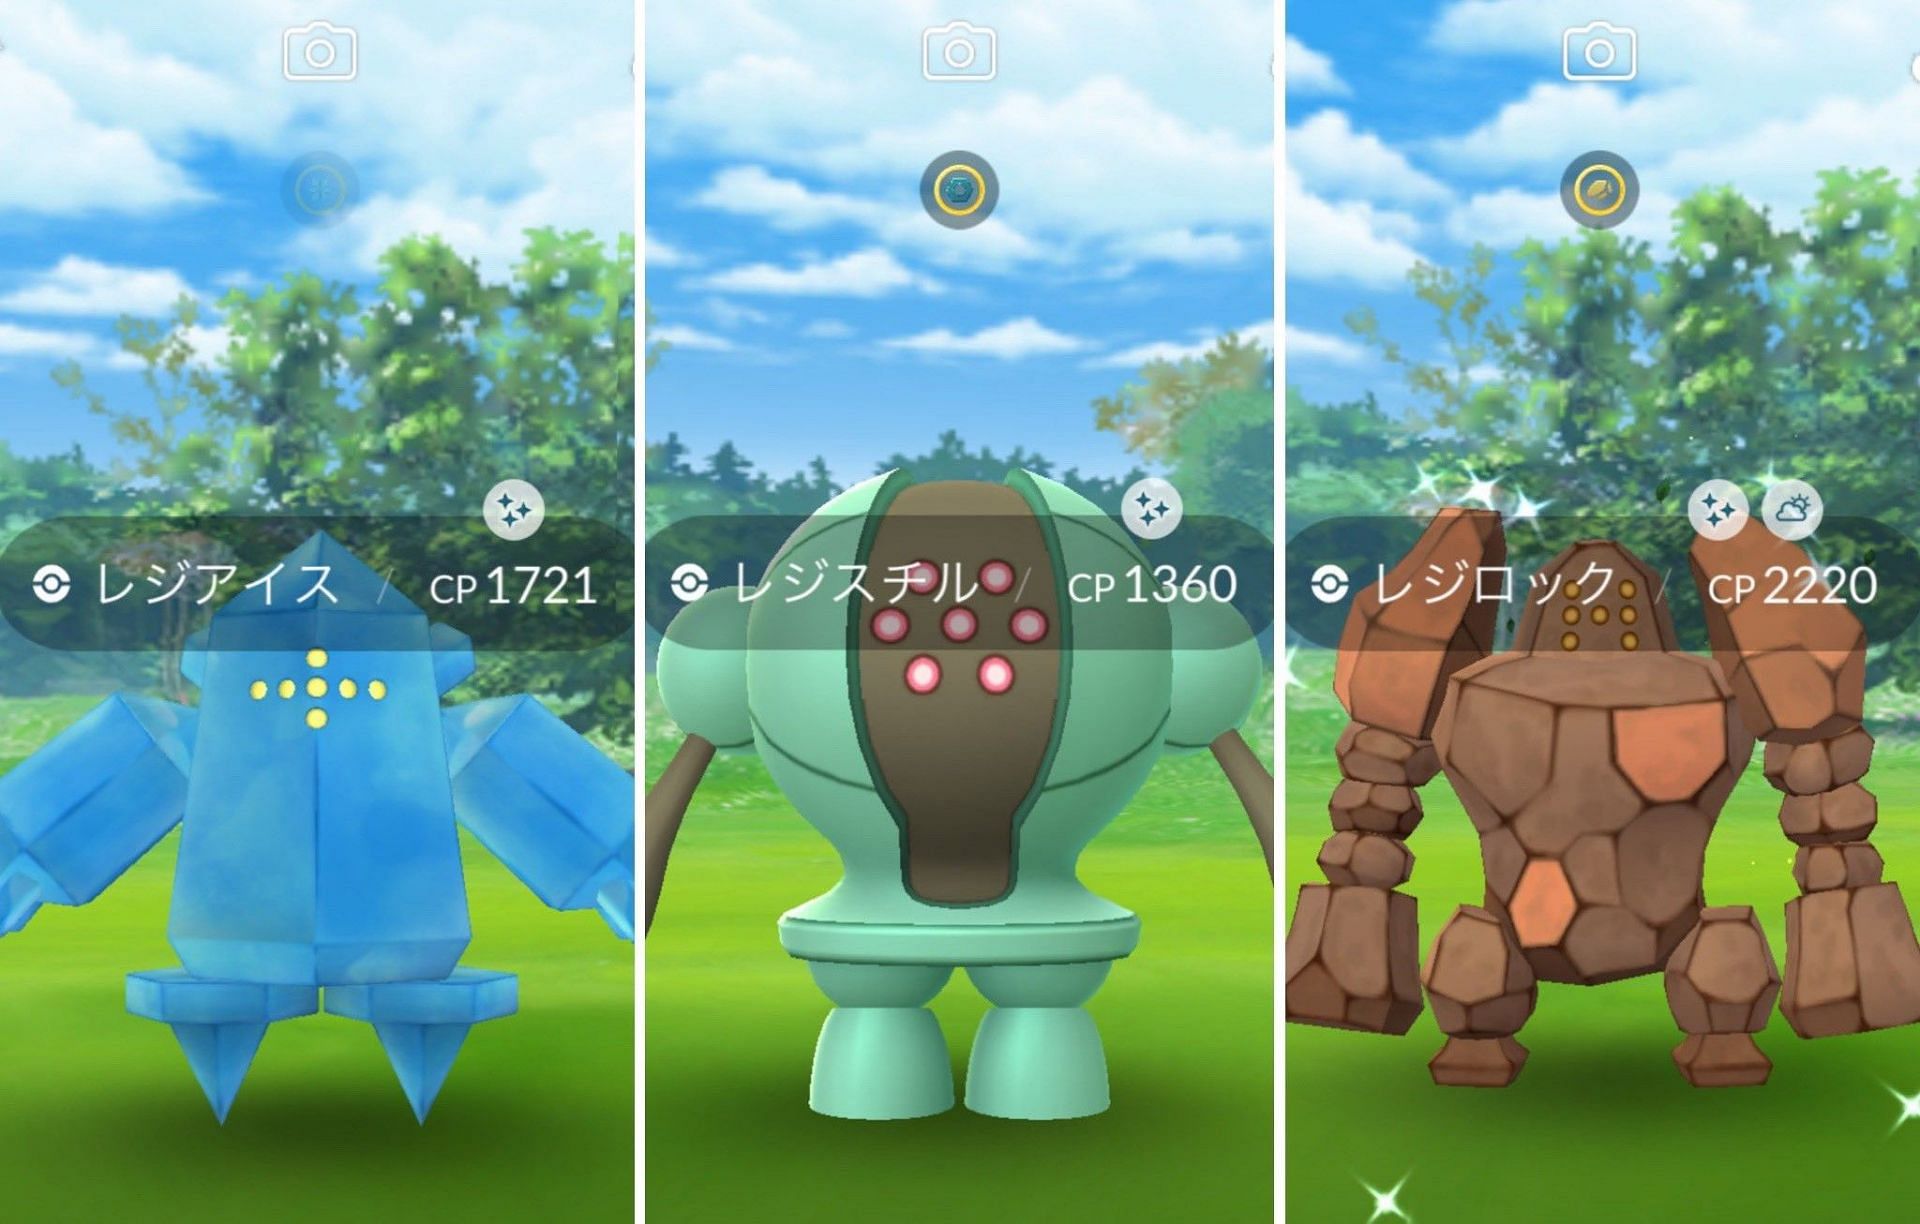 Regice, as well as its two partners, can have their shiny farms available in Pokemon GO (Image via Niantic)